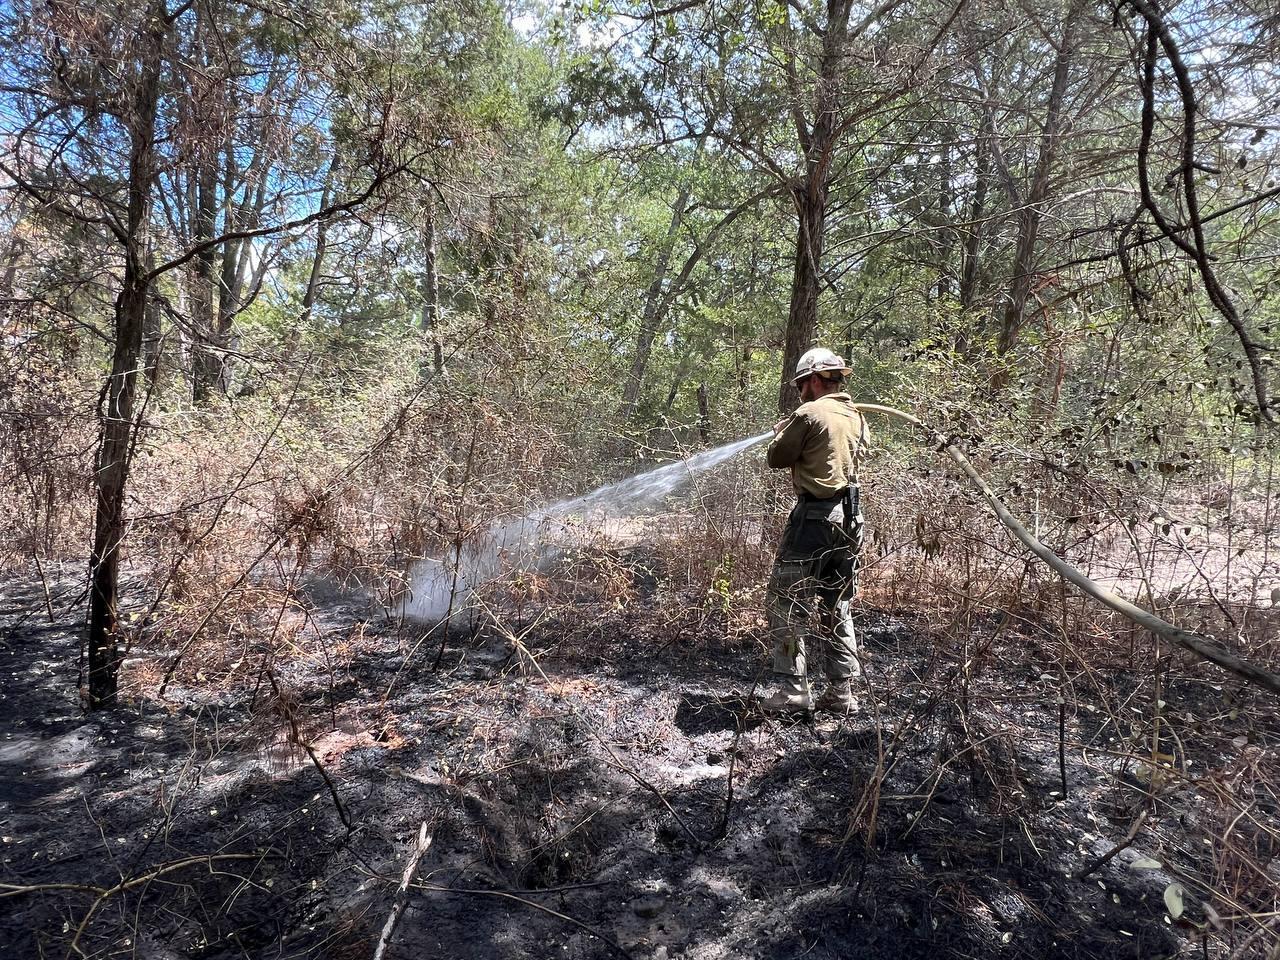 A firefighter with yellow shirt, green pants and hard hat stands on burned black ground and is surrounded by trees. Firefighter holds a hose over their shoulder and sprays water across the ground.